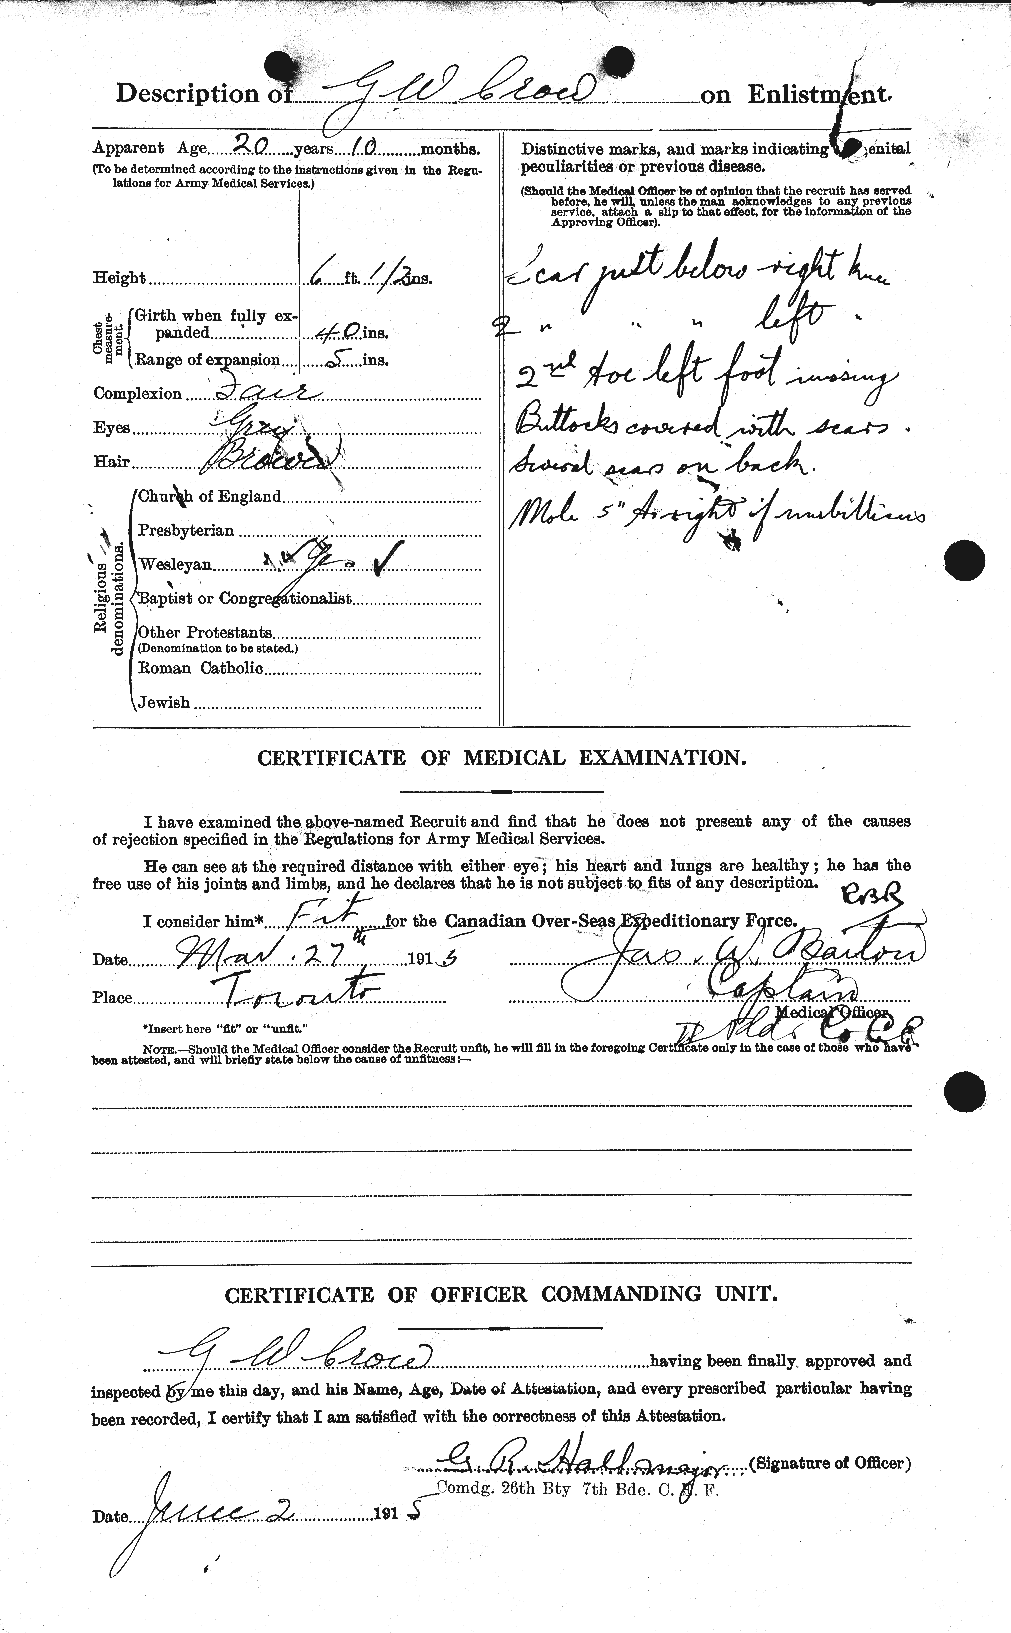 Personnel Records of the First World War - CEF 065548b